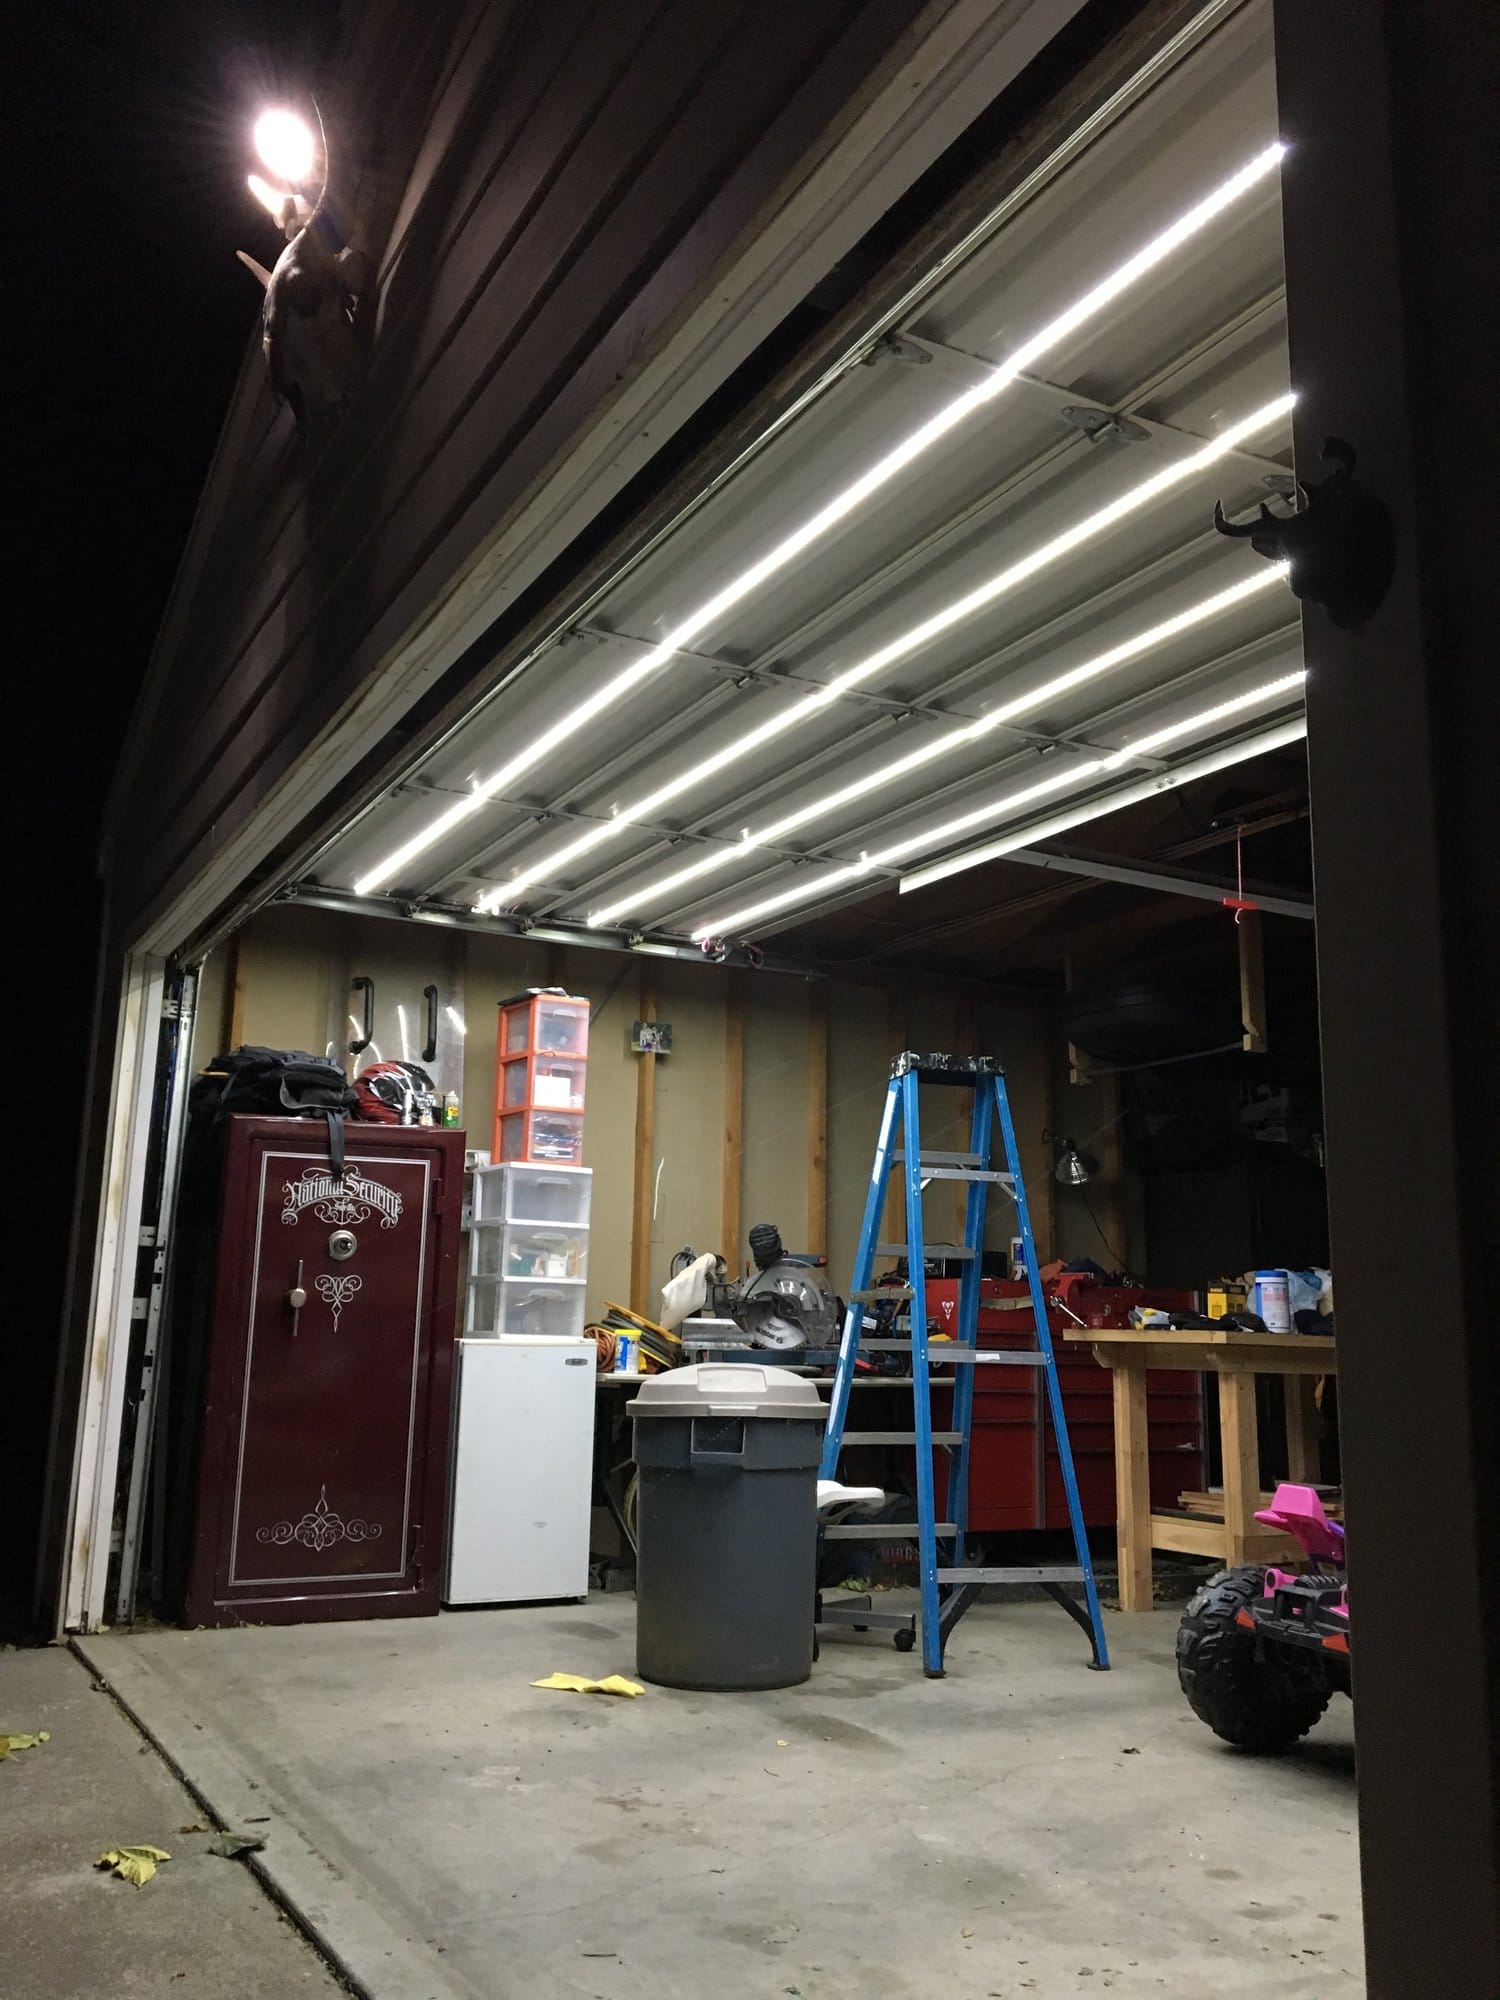  Garage Door Light Goes Off And On for Small Space